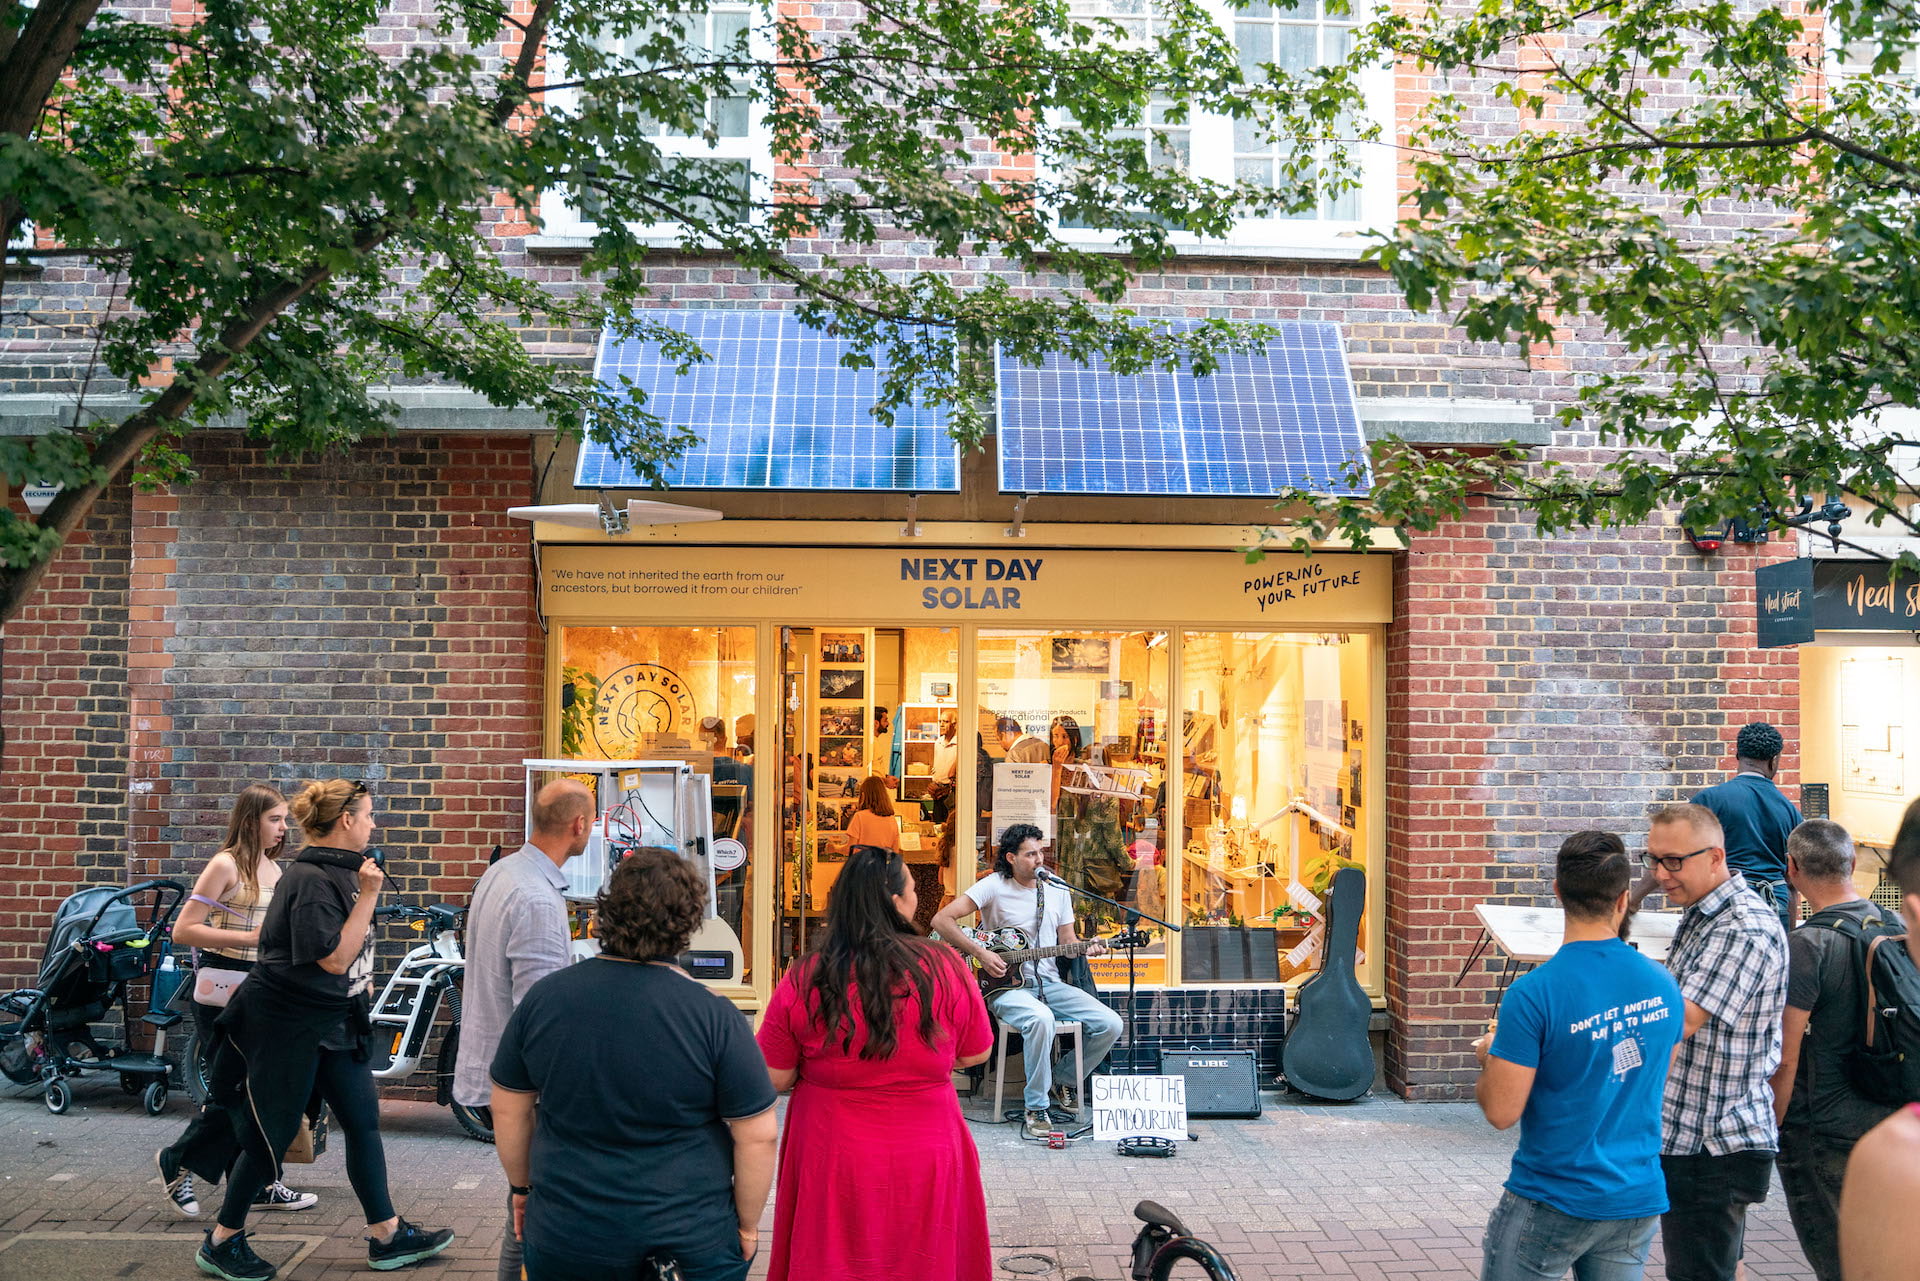 Switch to solar at this pop-up solar-powered shop in Covent Garden